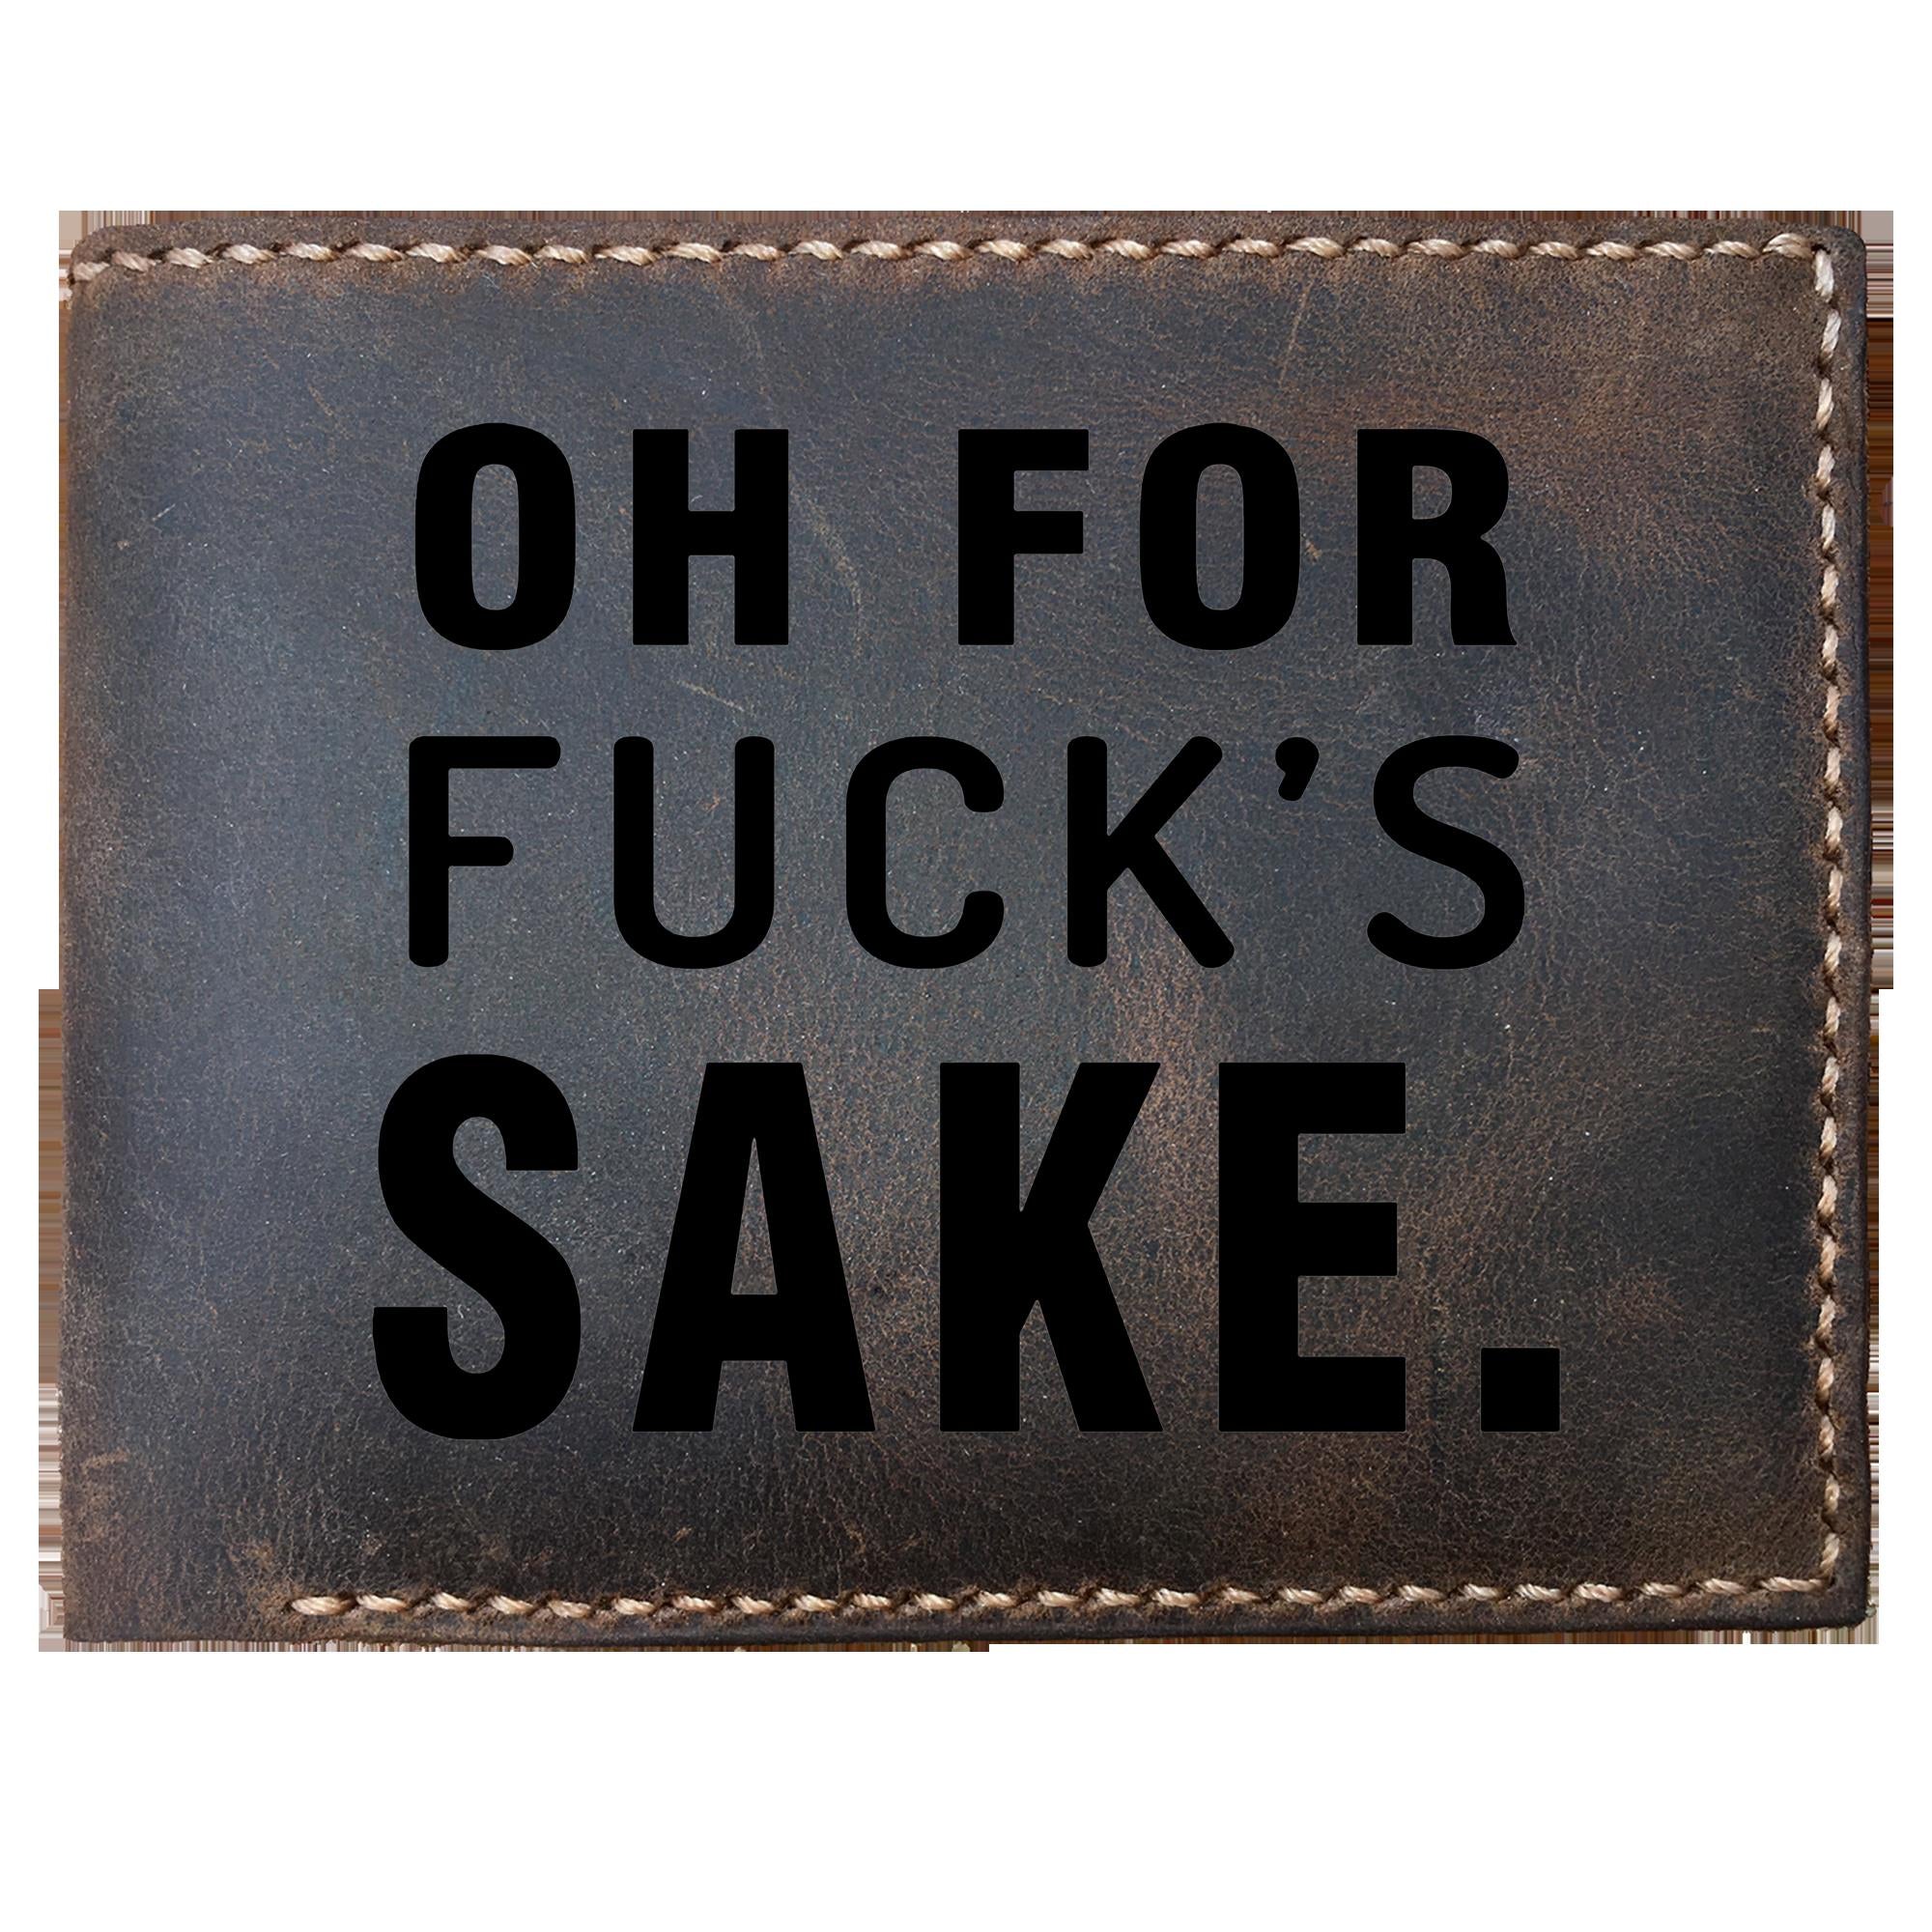 Skitongifts Funny Custom Laser Engraved Bifold Leather Wallet For Men, Oh For Fuck's Sake, Funny Novelty Coolest